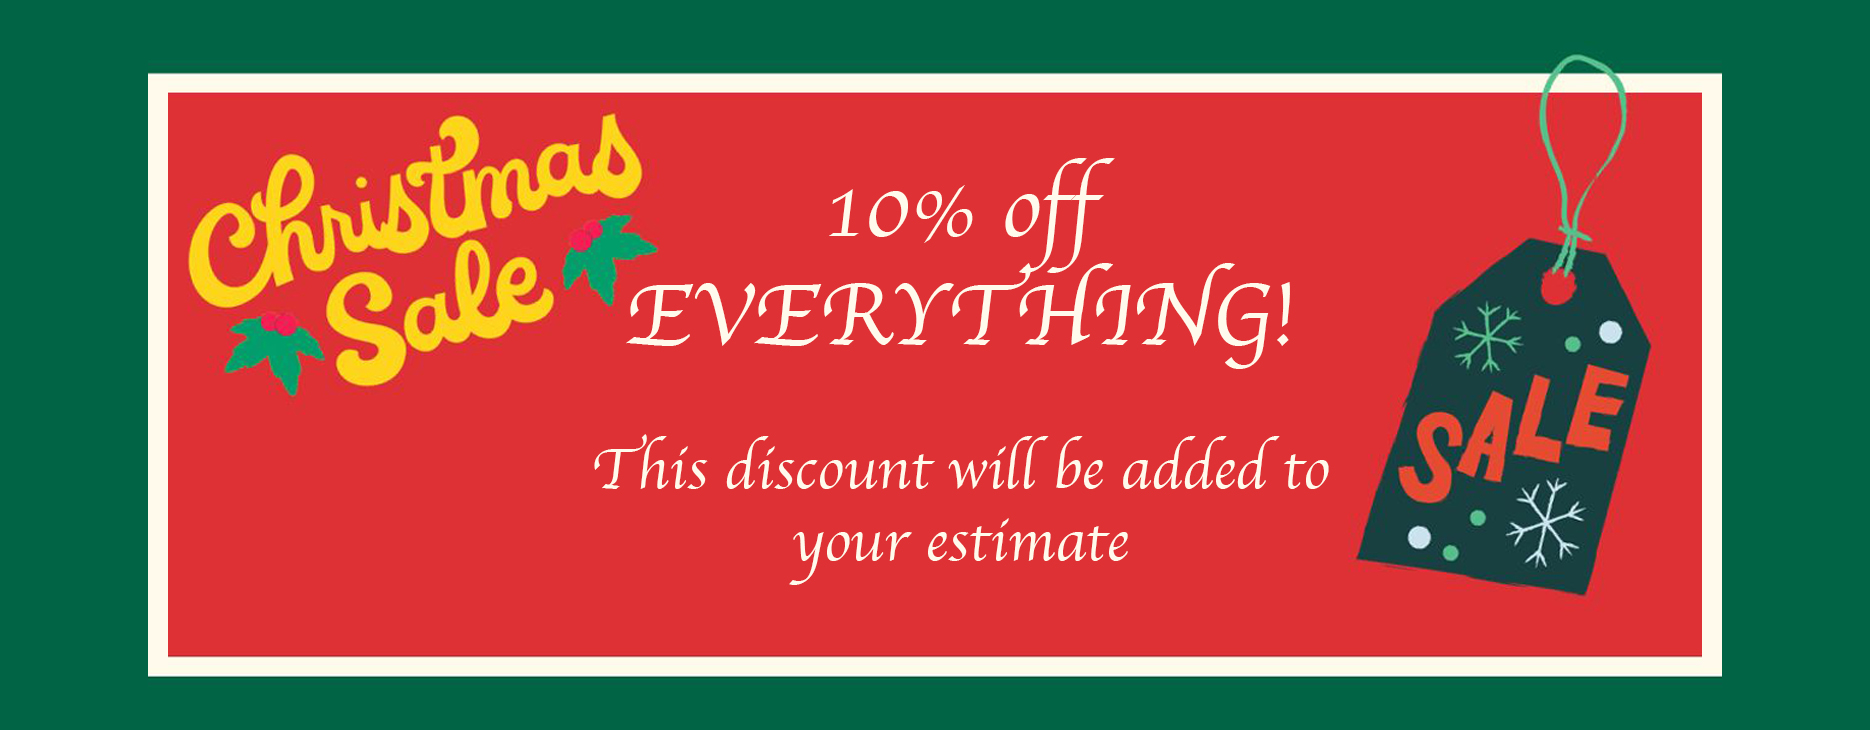 Wholesale chistmas 10% discount